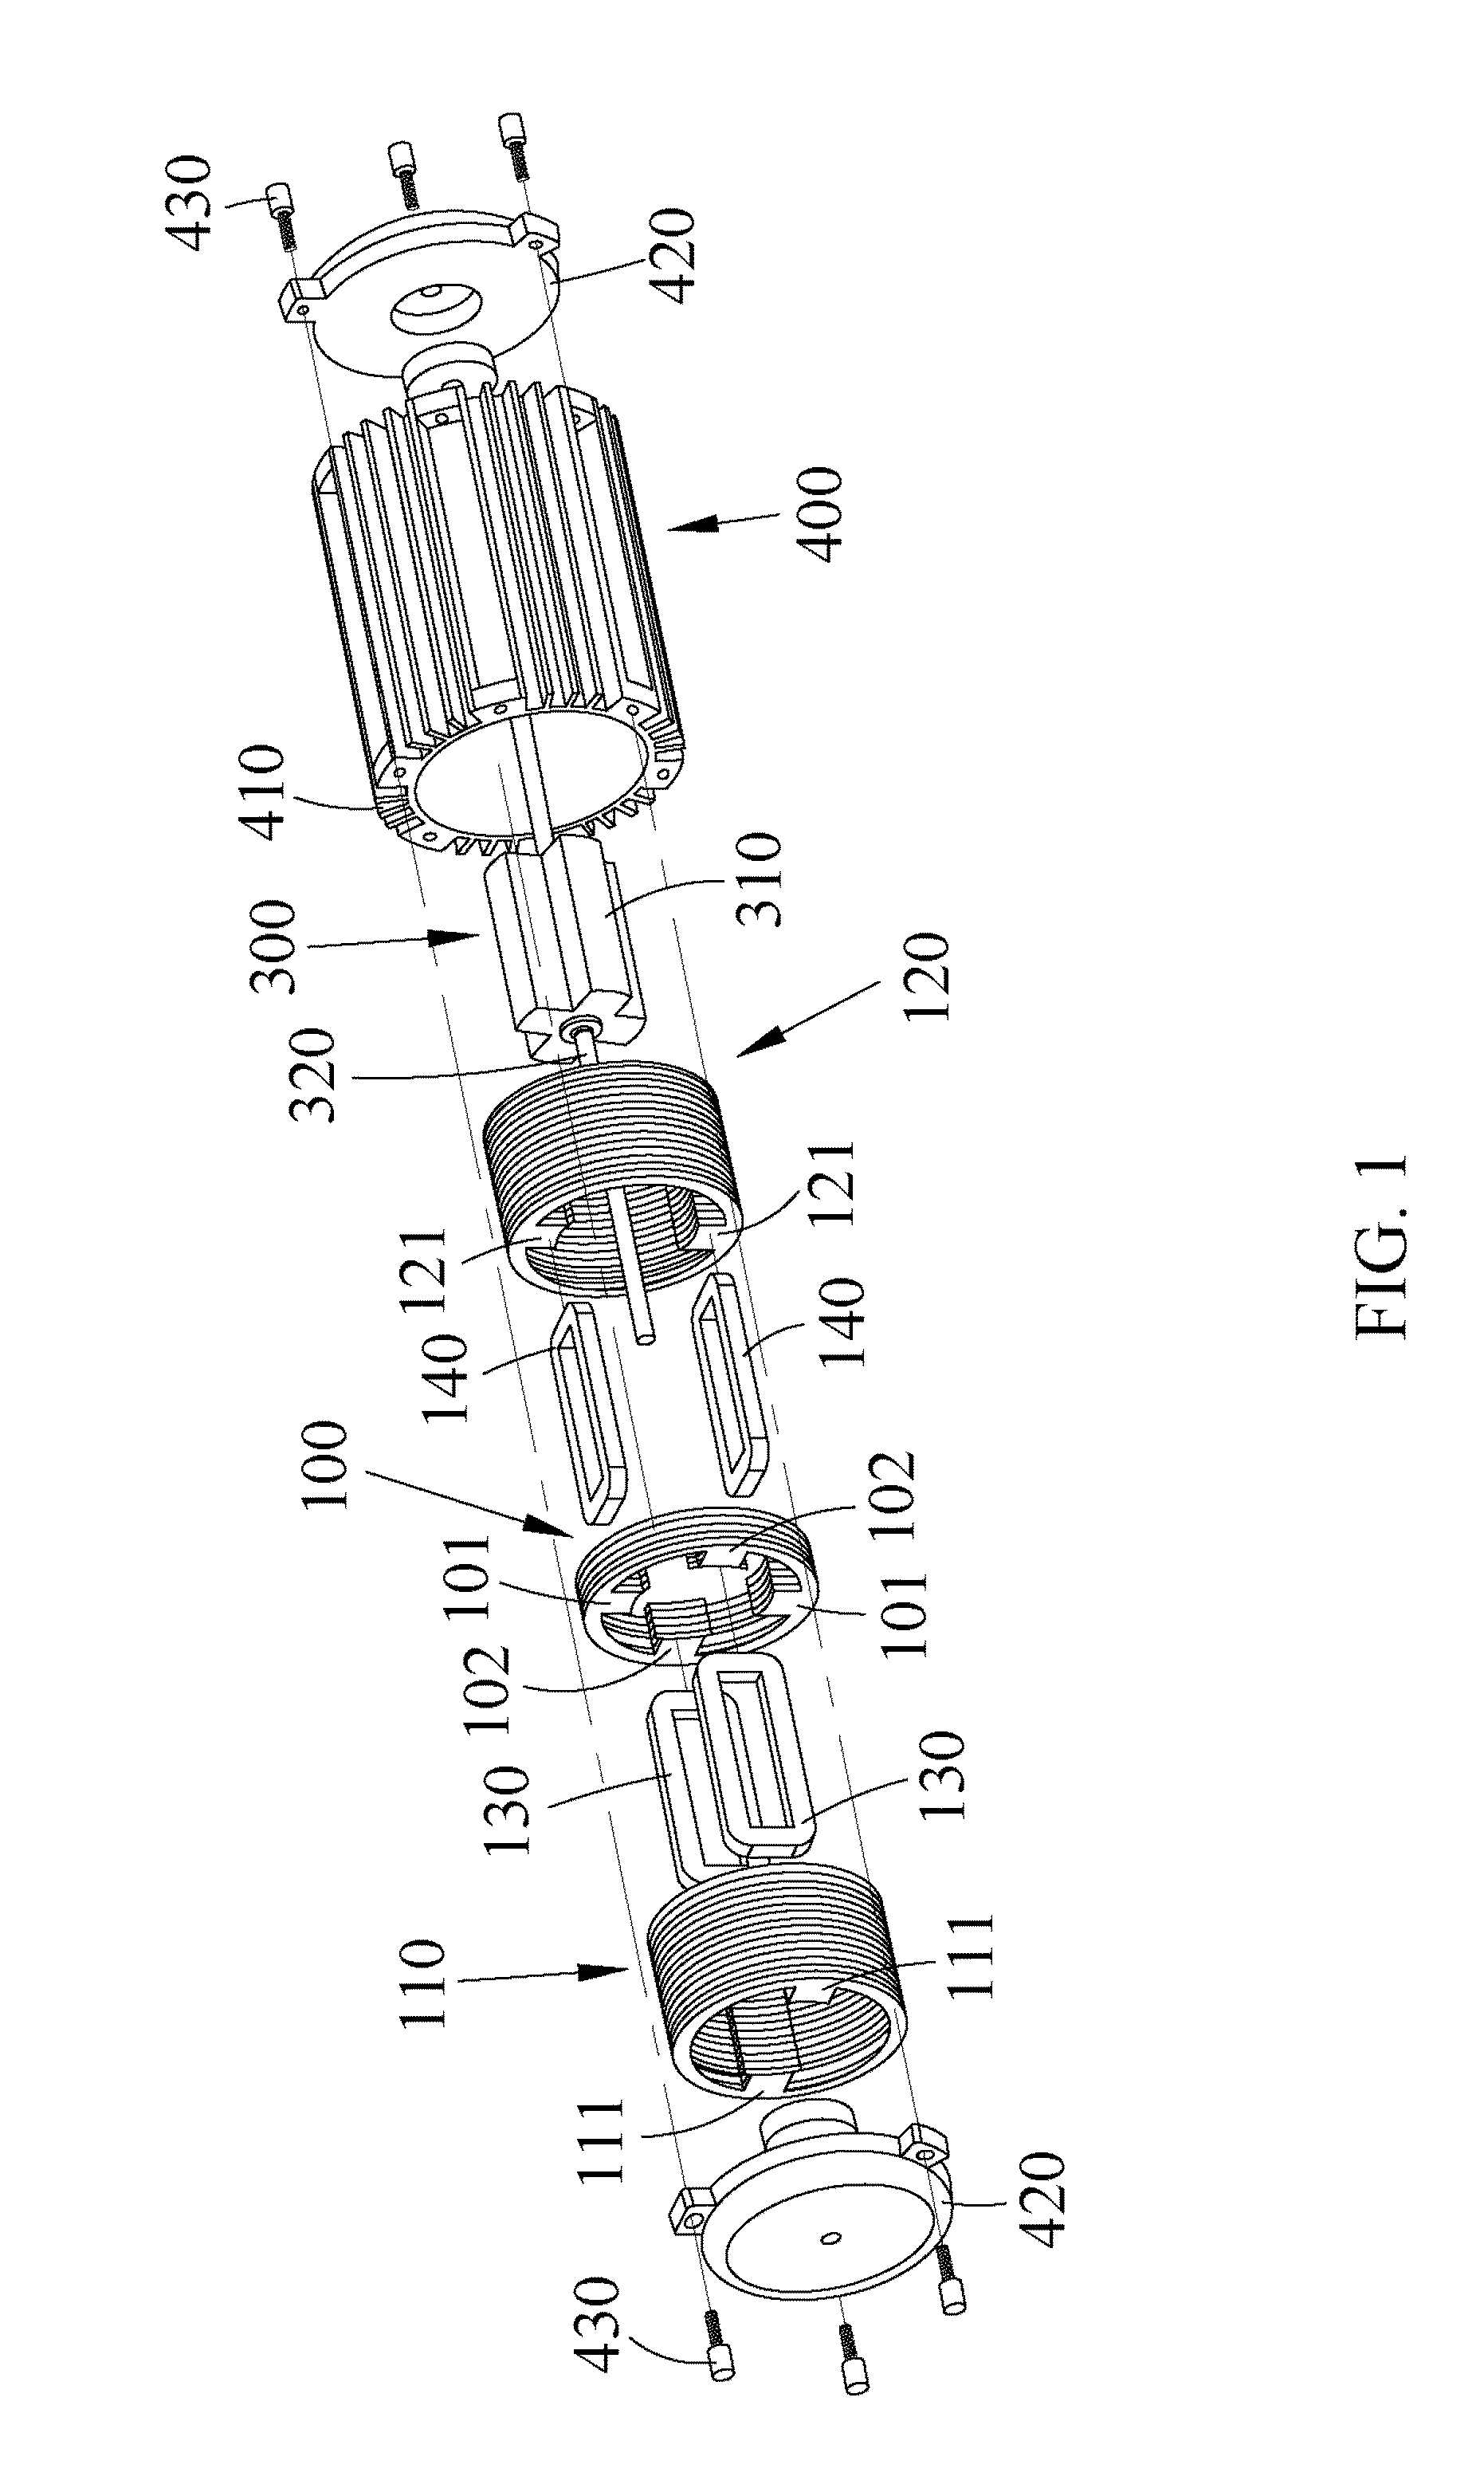 Salient-pole type linear motor and reciprocal double piston compressor with salient-pole type linear motor